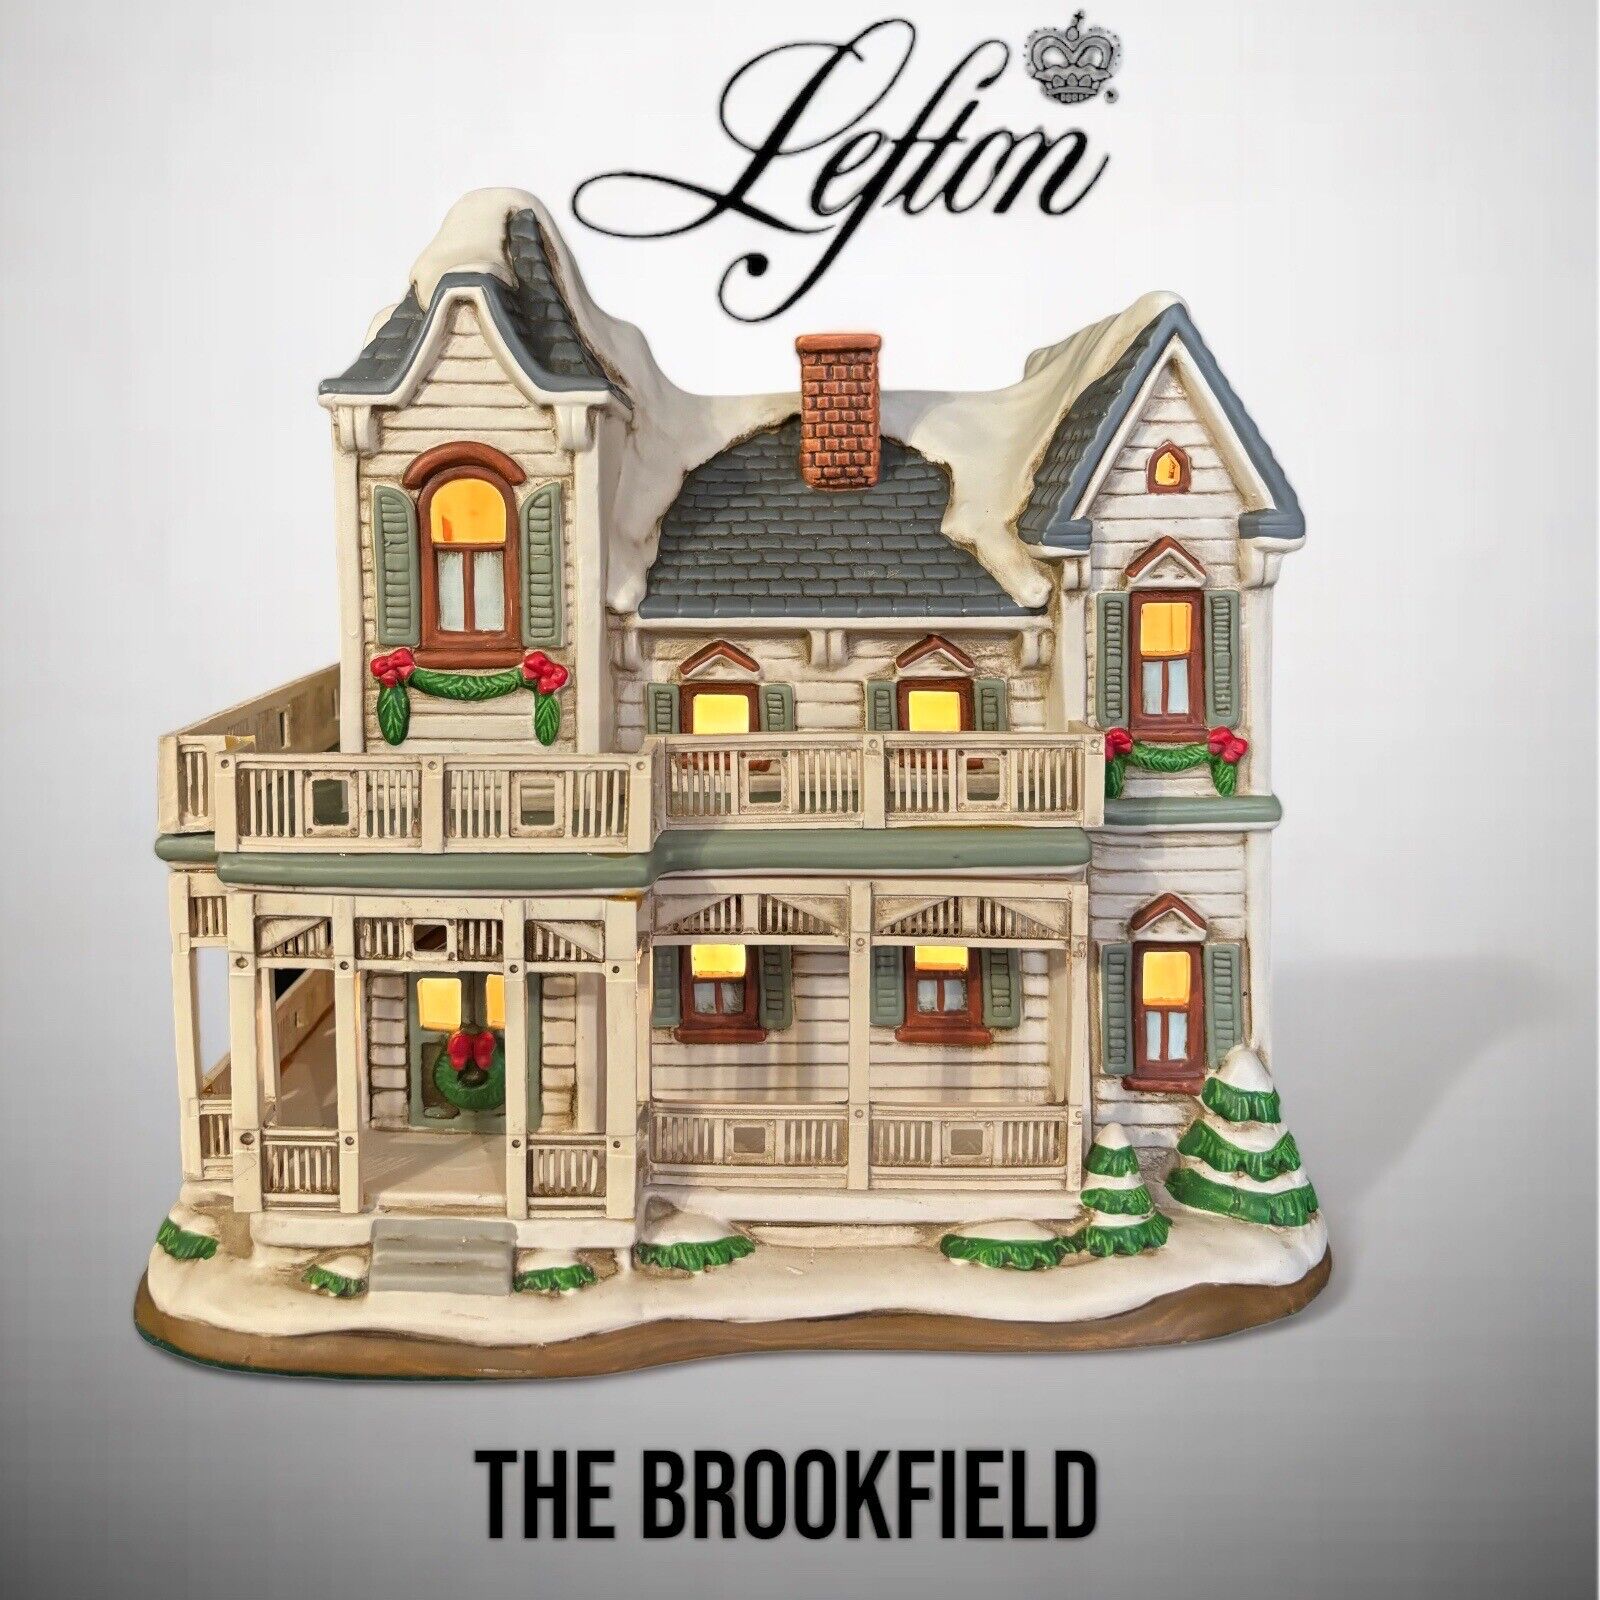 Lefton The Brookfield 1995 Lighted Colonial Village Limited Edition 3635 of 5500